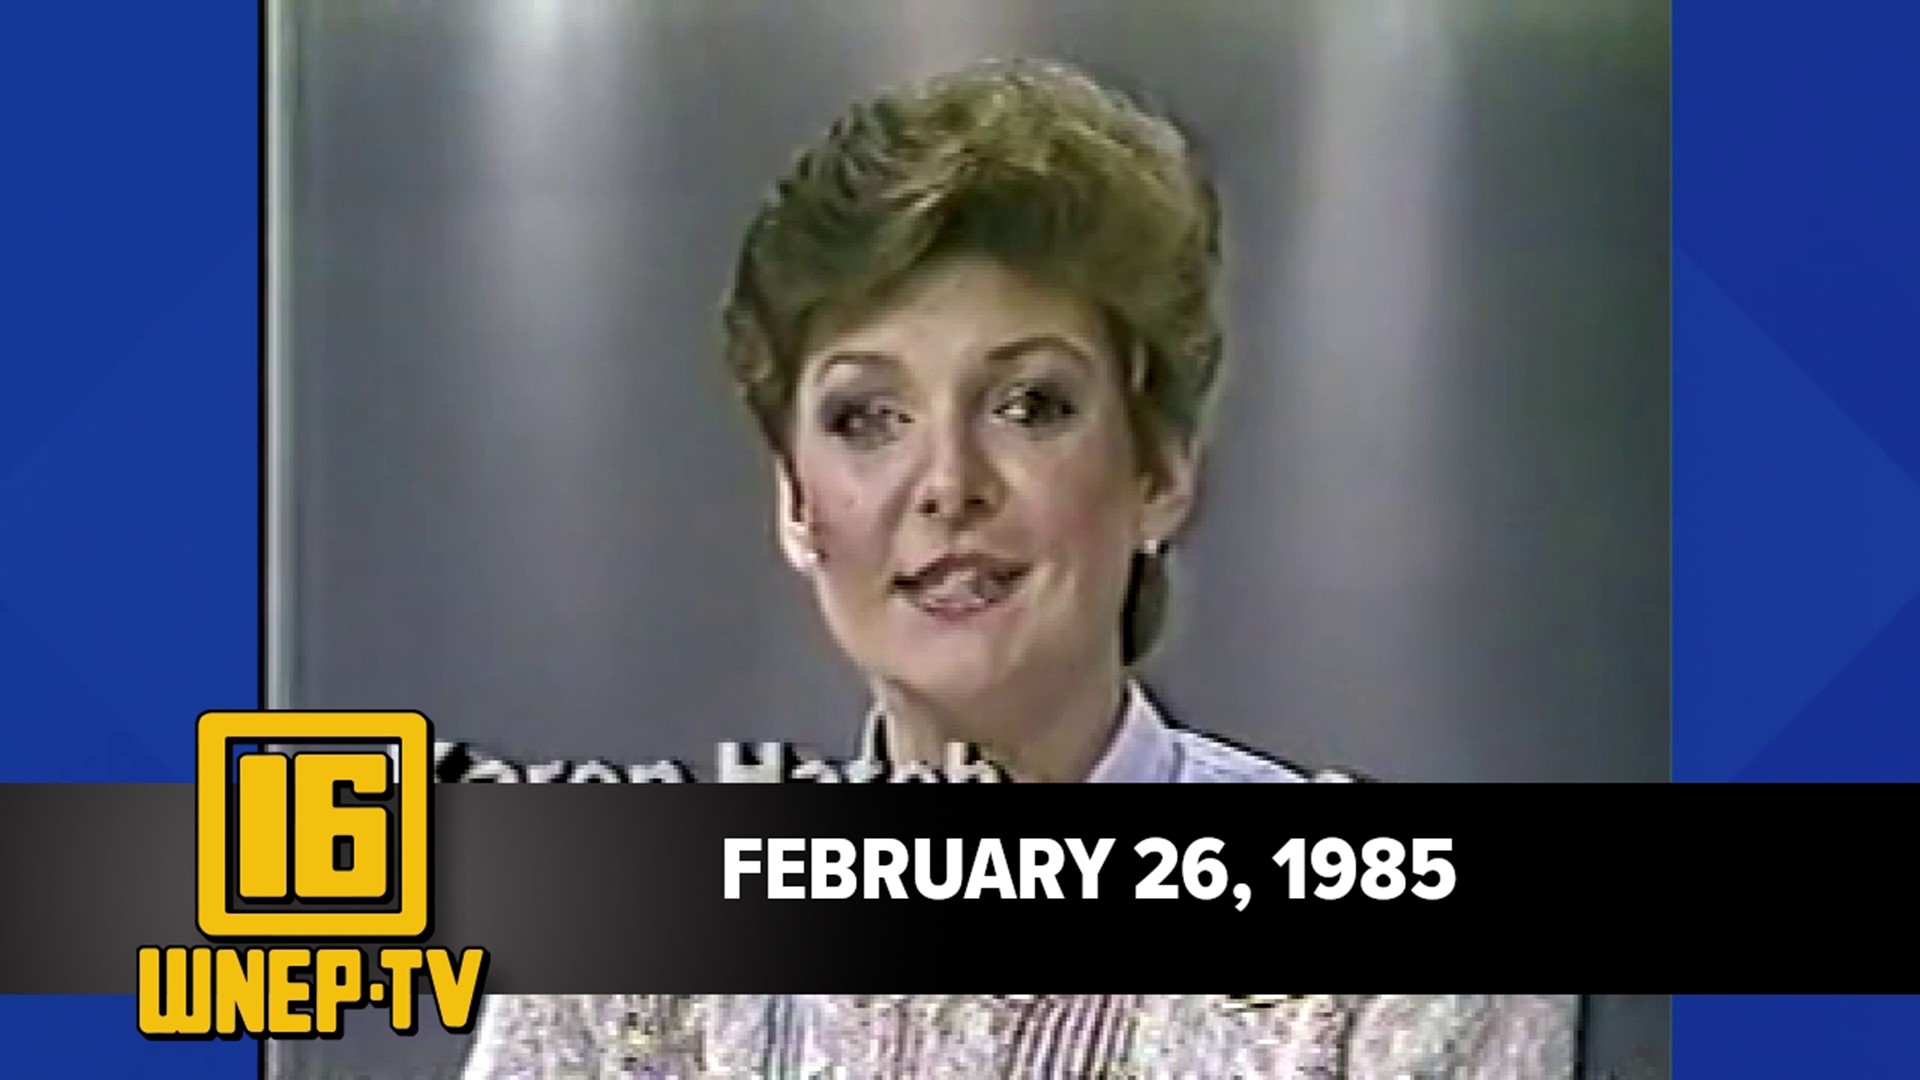 Join Karen Harch and Nolan Johannes with curated stories from February 26, 1985.